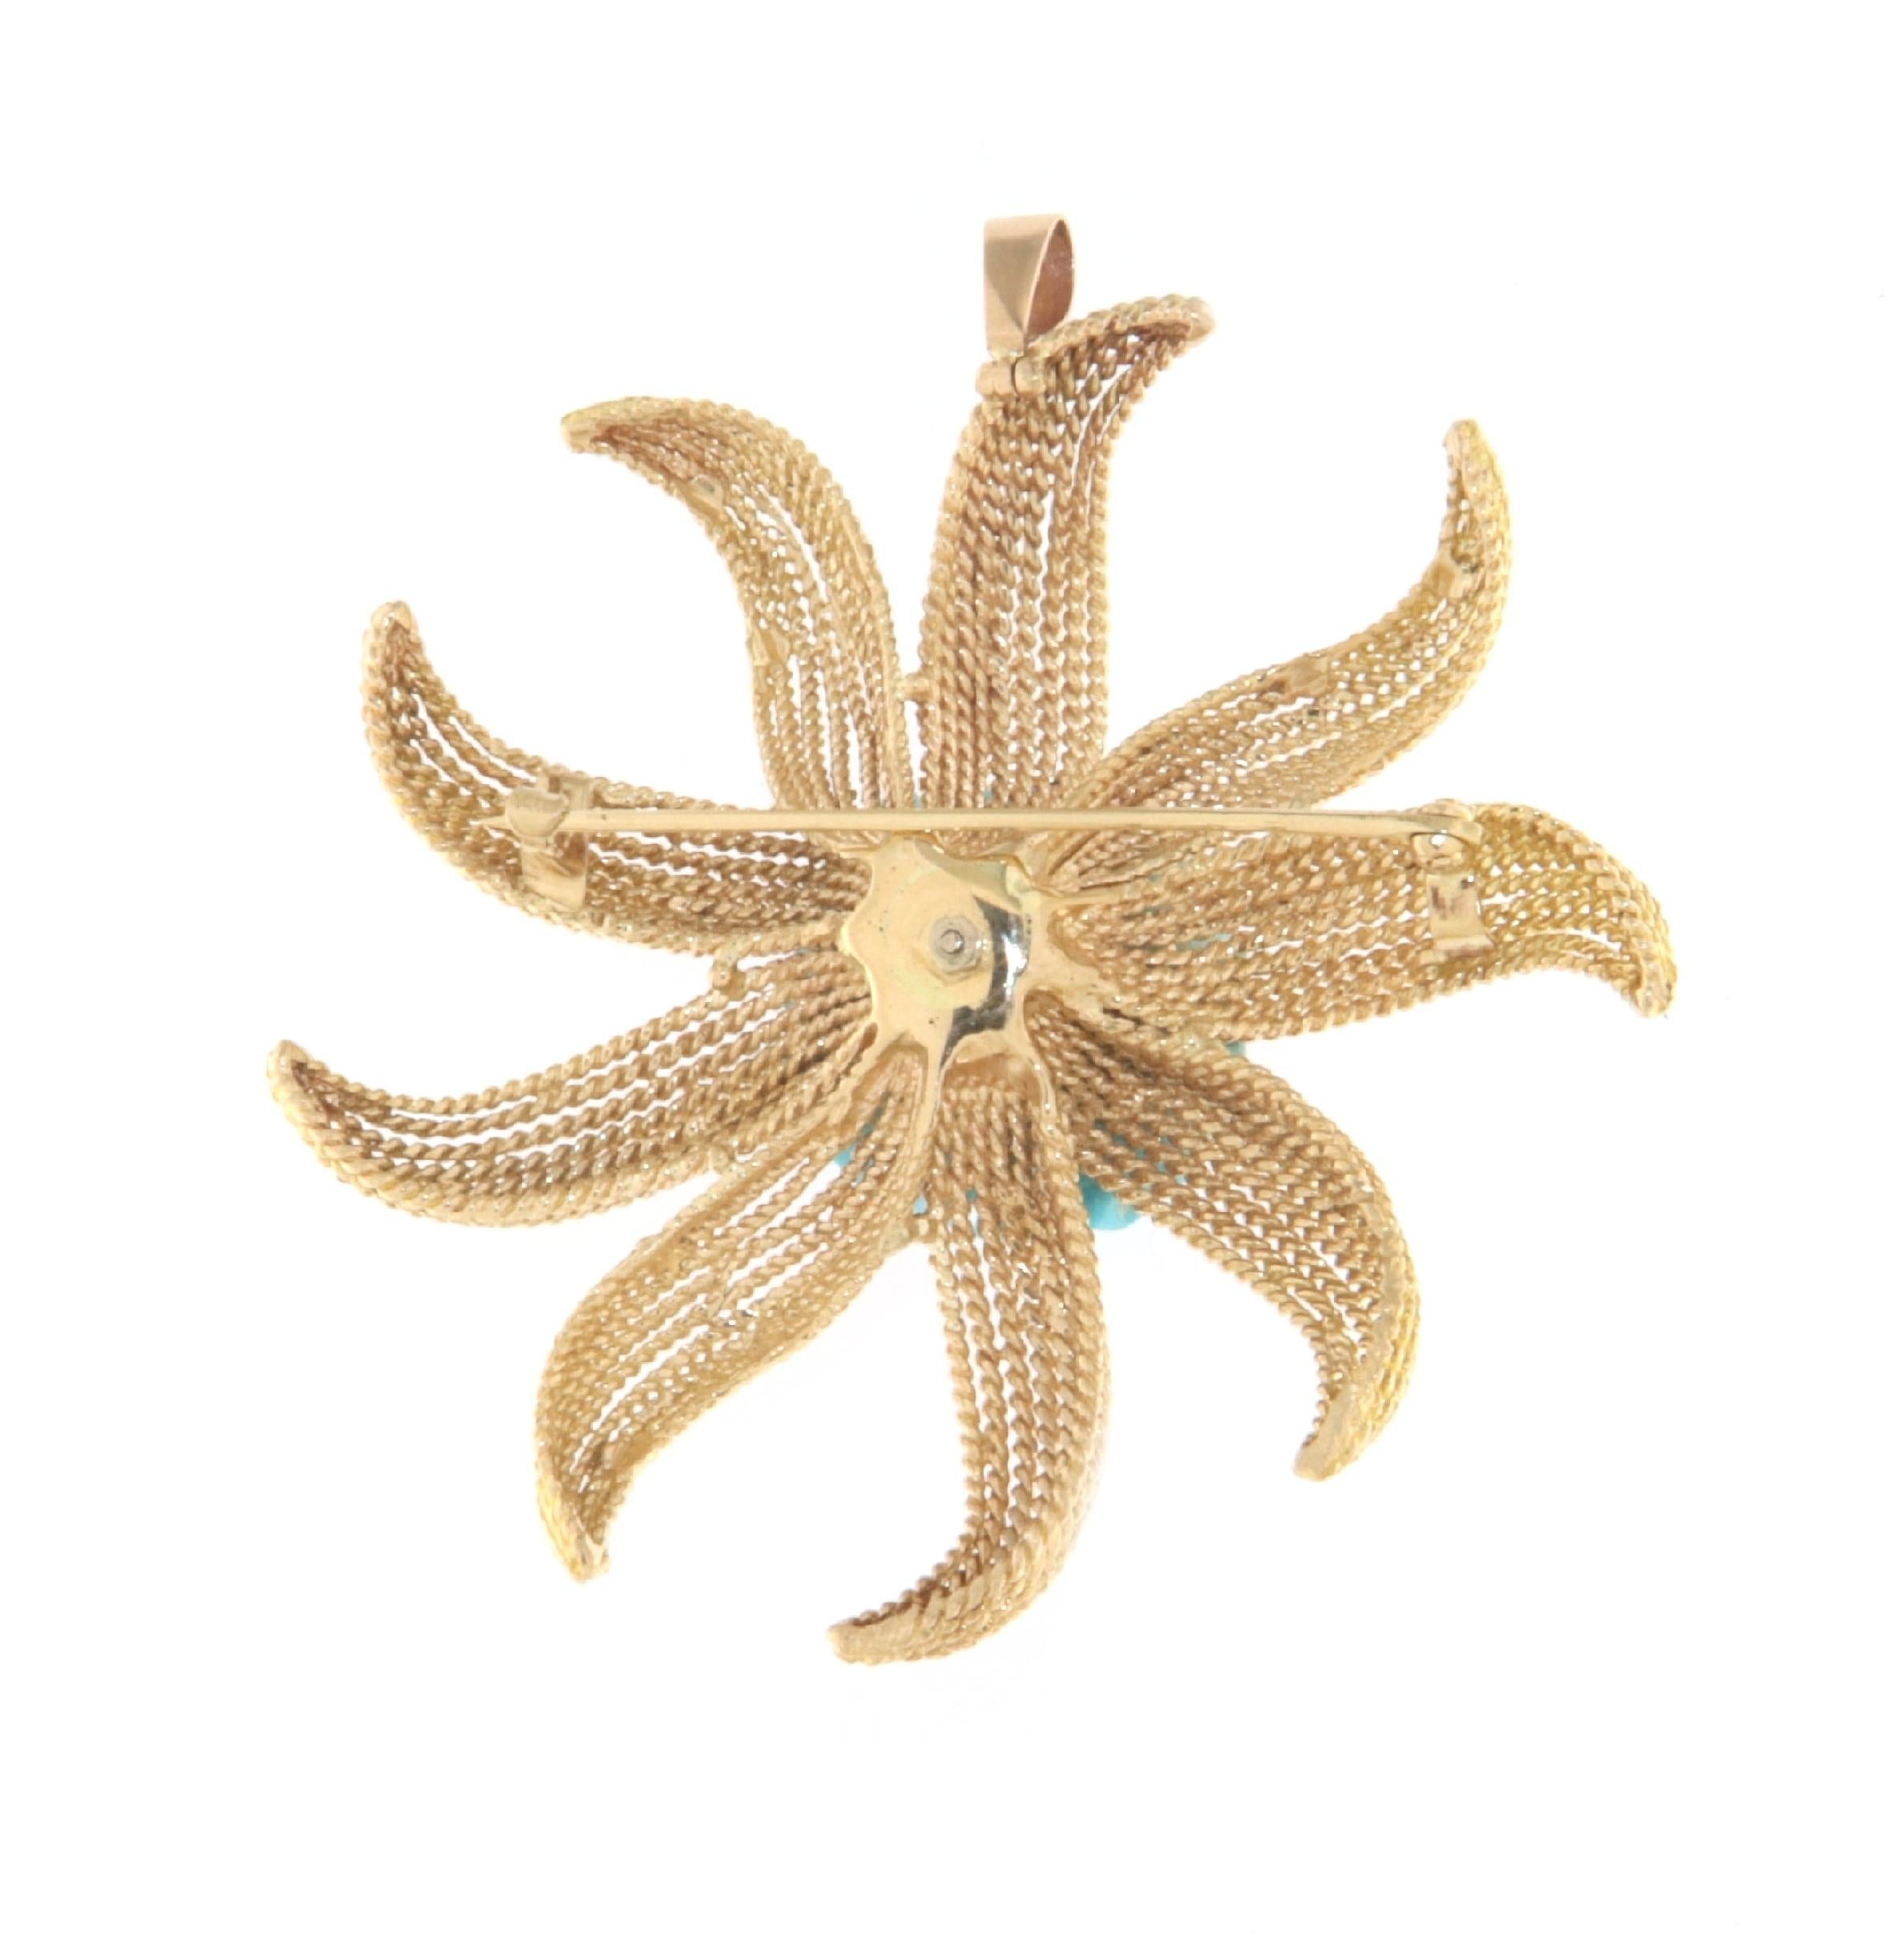 Brilliant Cut Starfish Turquoise Diamonds 14 Karat Yellow Gold Brooch And Pendant Necklace For Sale